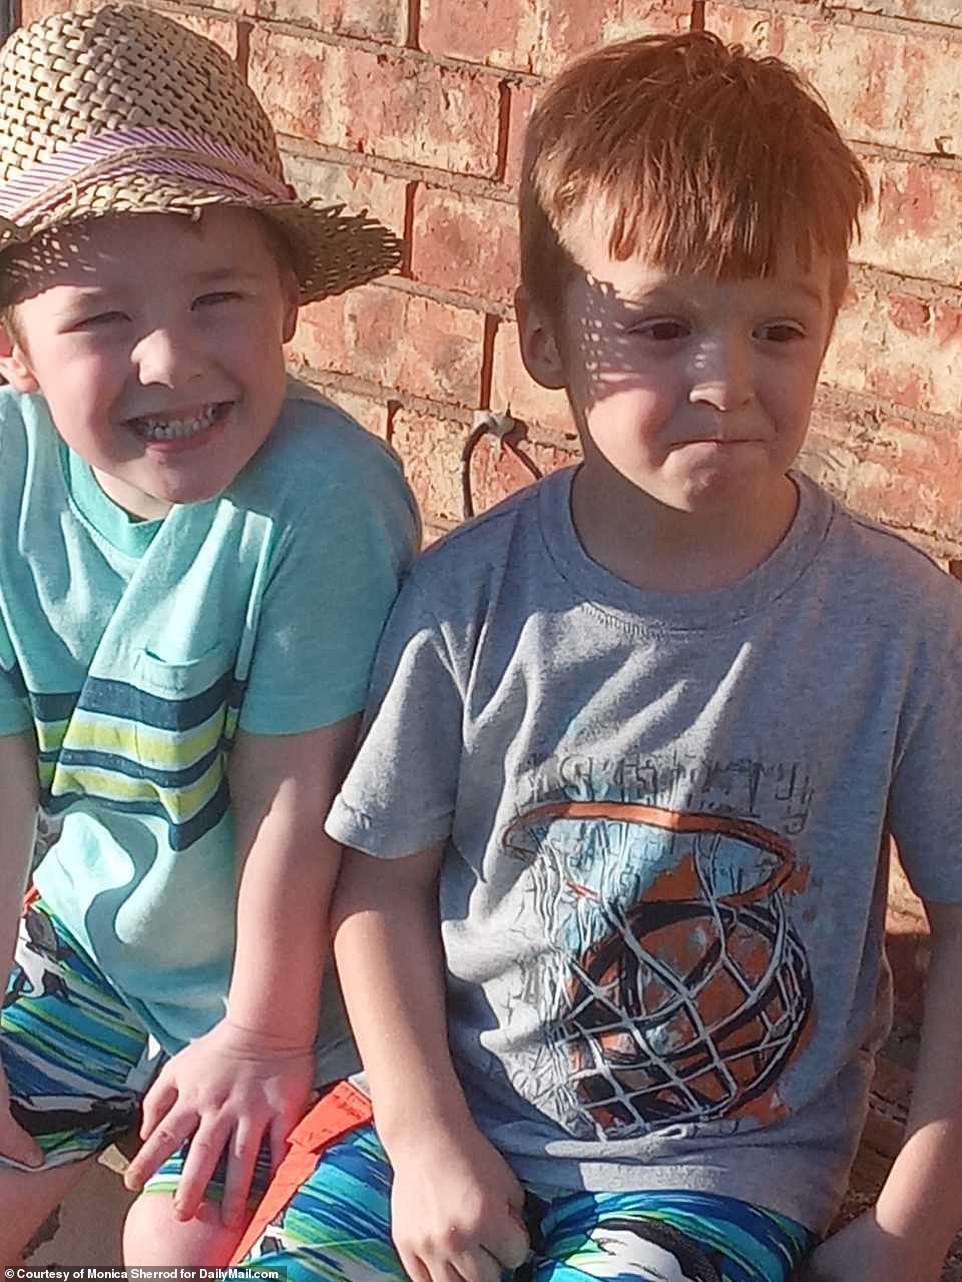 Cash, who had been staying in his father's ex-girlfriend home, was asleep next to his twin brother Carter (left) when he was snatched from bed and killed shortly after